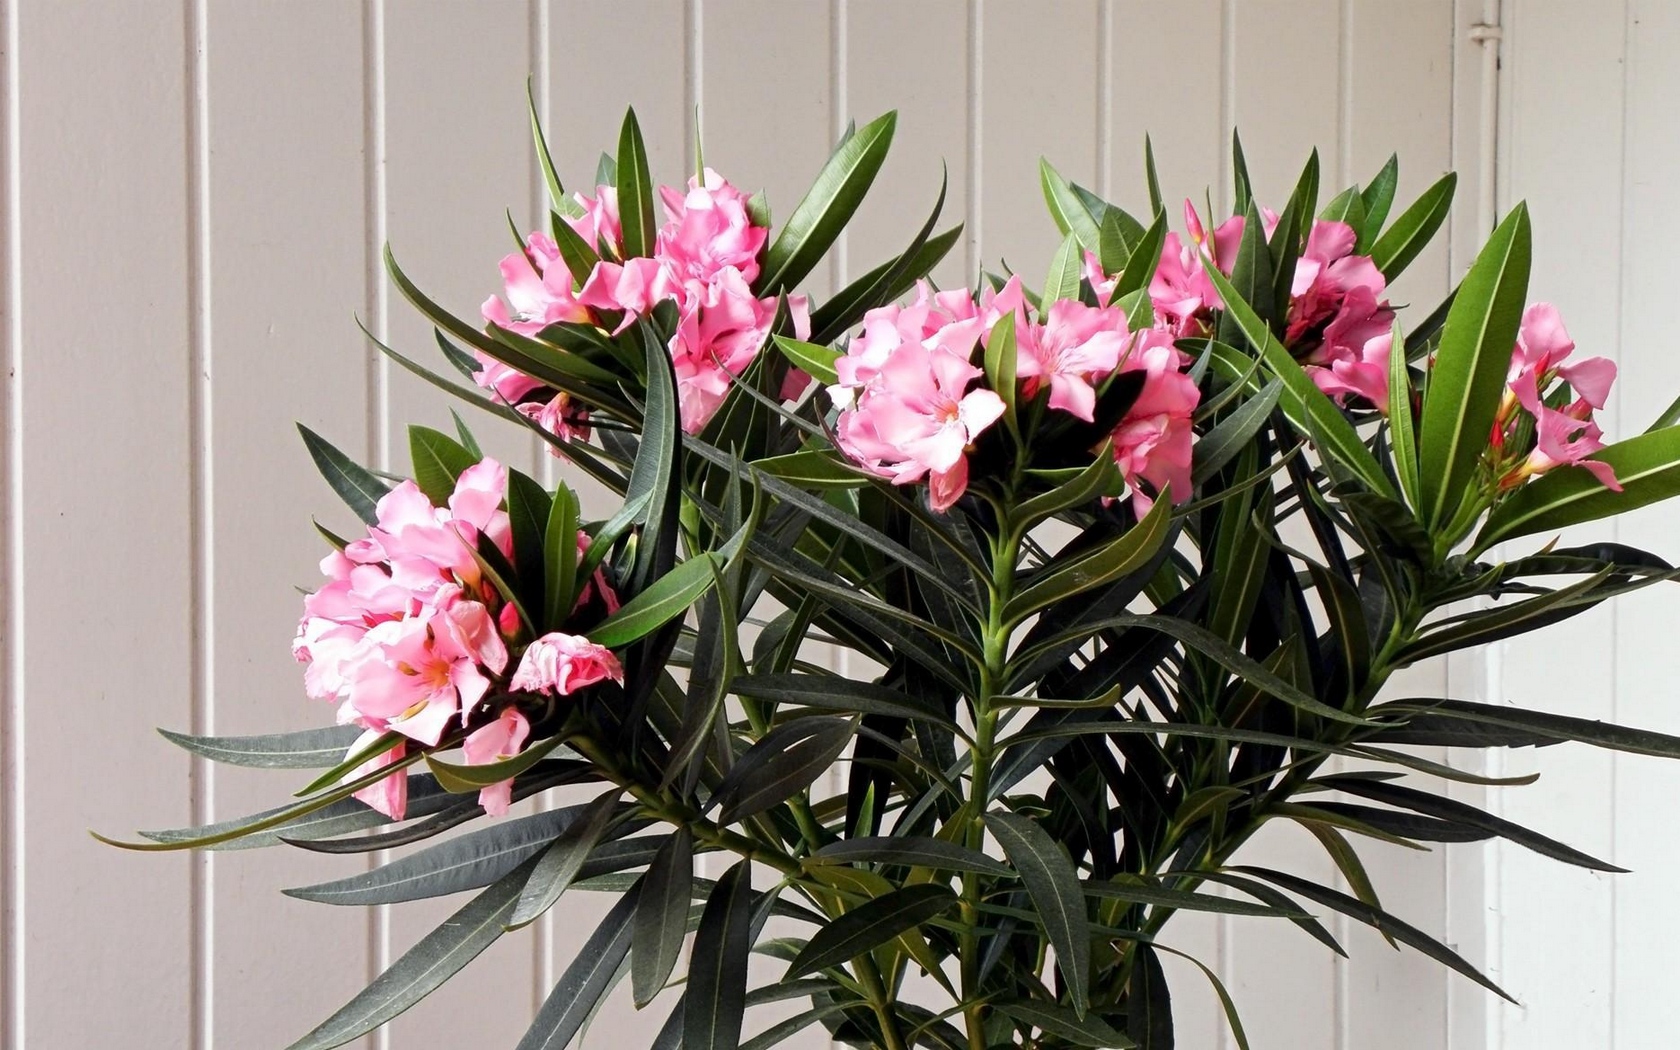 Caring for an oleander at home is not fraught with significant difficulties, but it requires a grower to know the nuances of growing